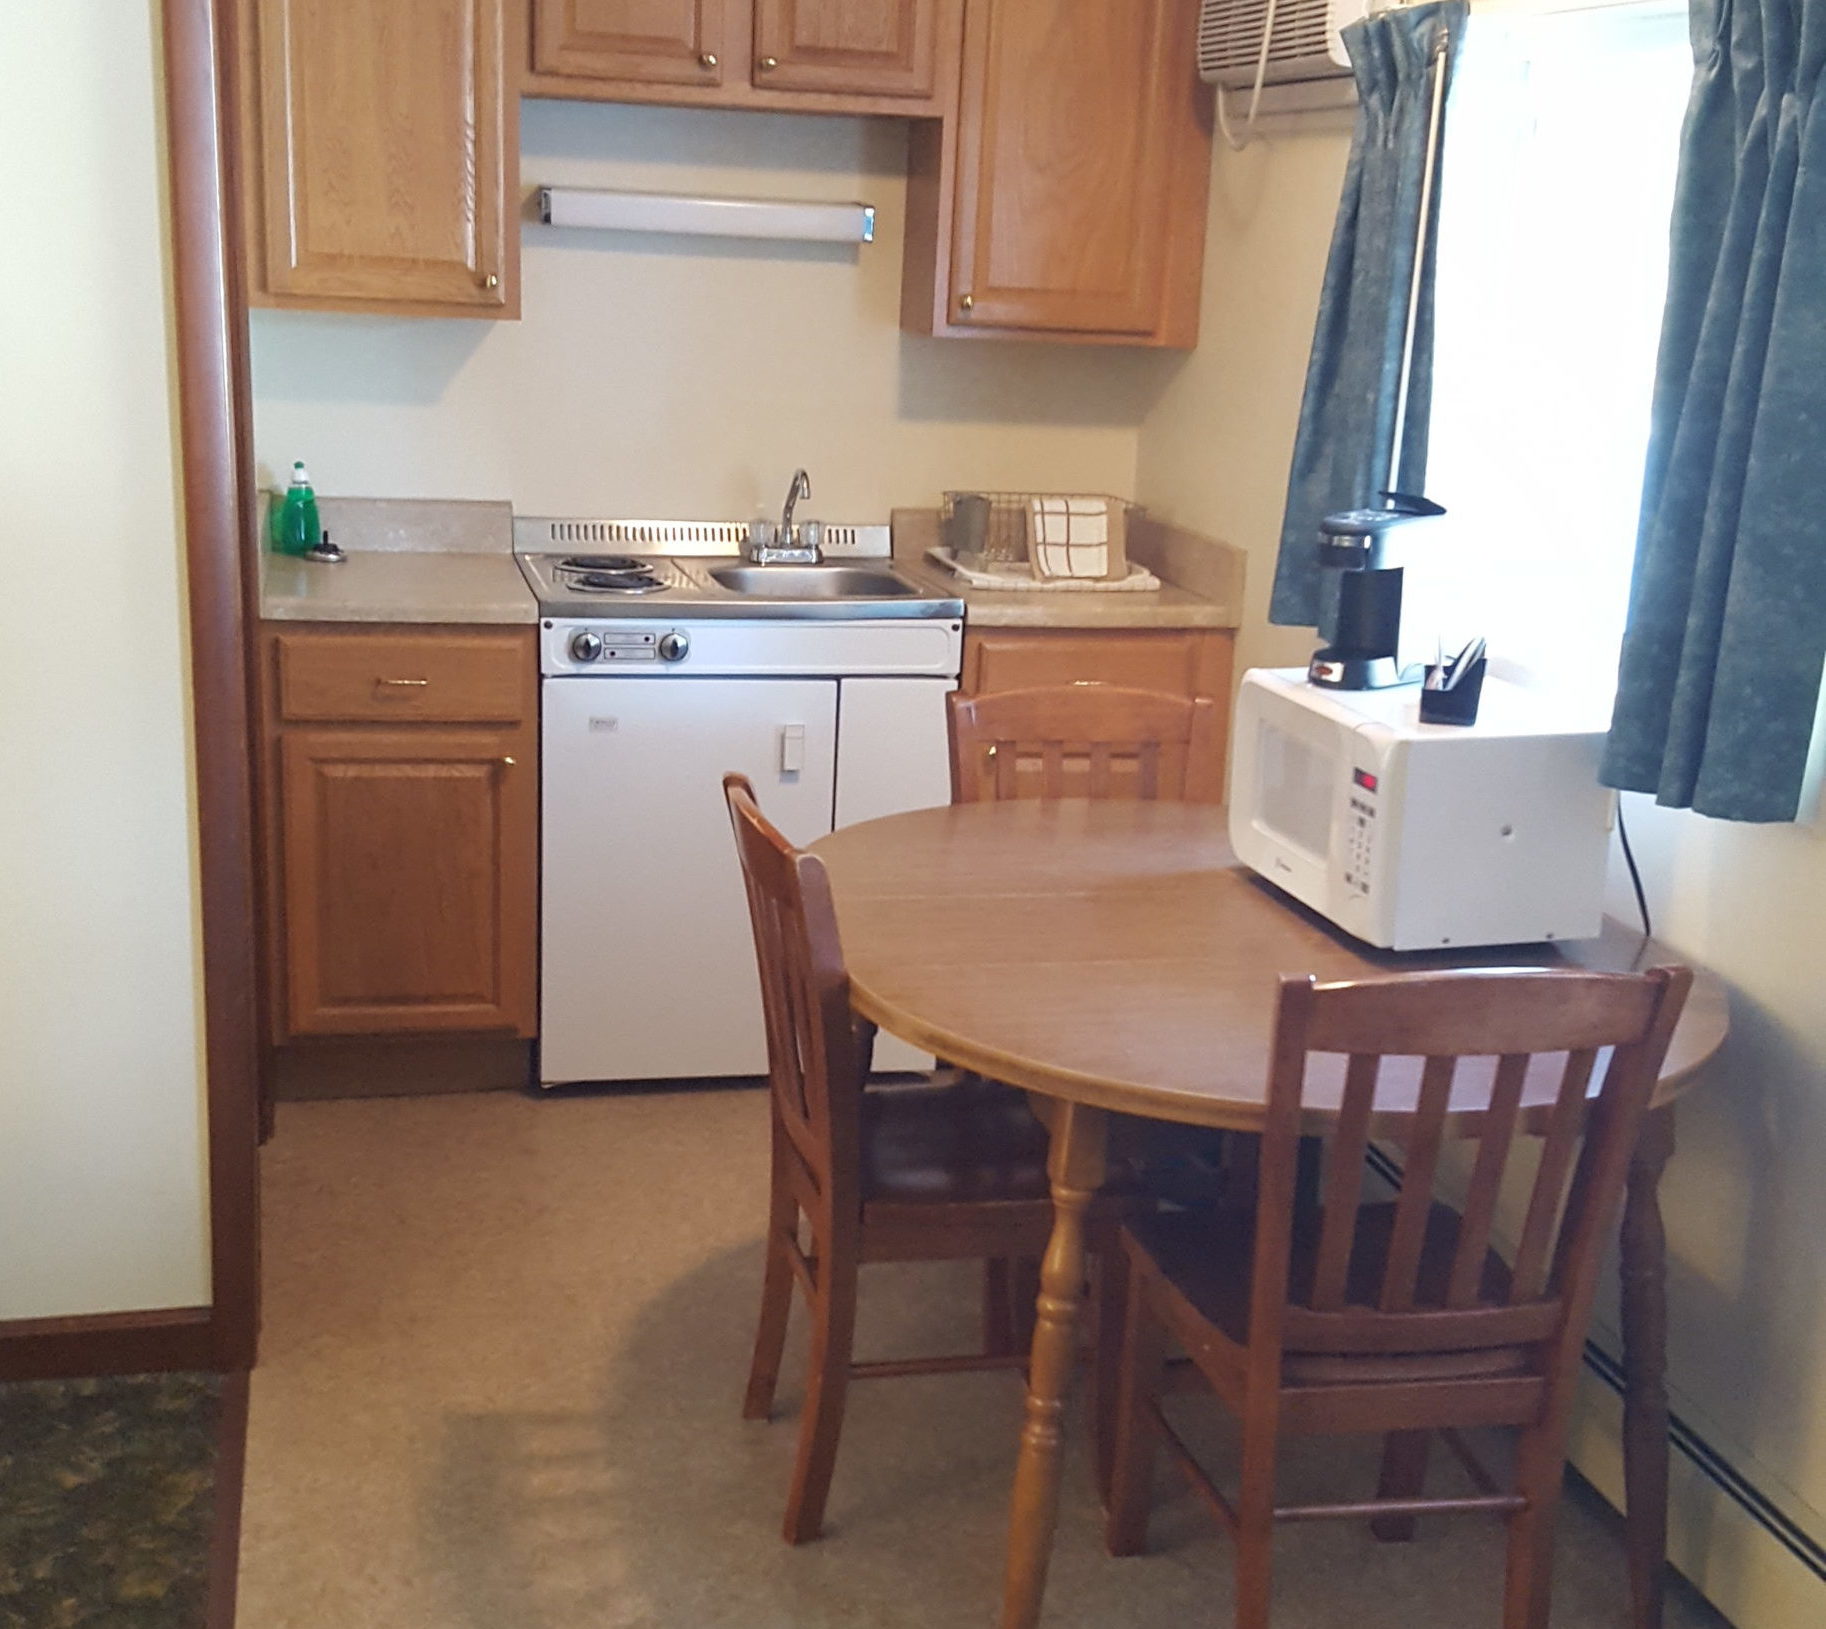 Motel room kitchenette and table.